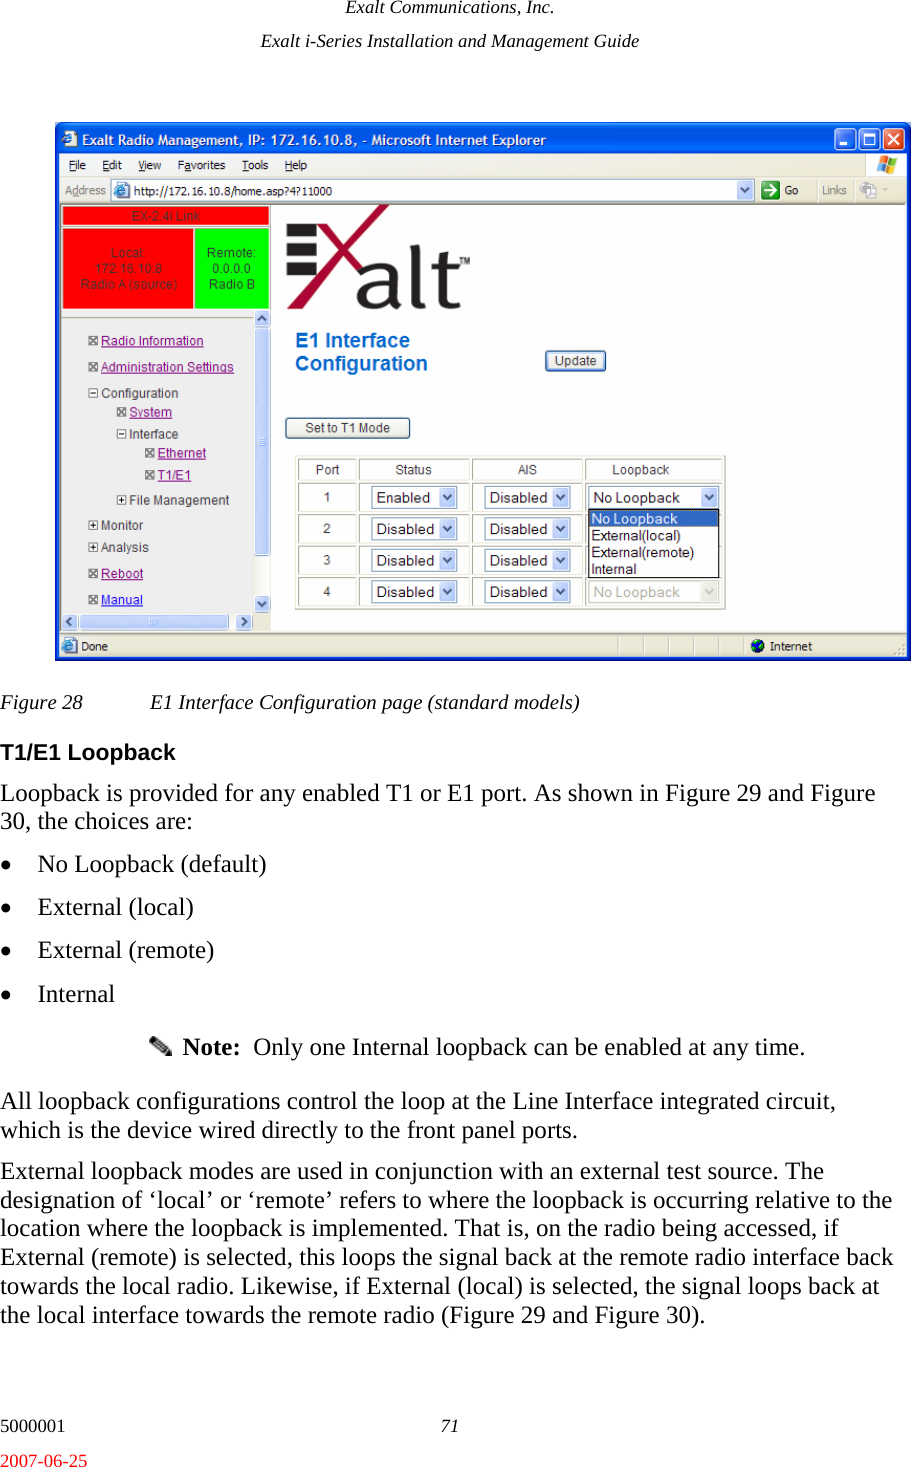 Exalt Communications, Inc. Exalt i-Series Installation and Management Guide 5000001  71 2007-06-25 Figure 28  E1 Interface Configuration page (standard models) T1/E1 Loopback Loopback is provided for any enabled T1 or E1 port. As shown in Figure 29 and Figure 30, the choices are: • No Loopback (default) • External (local) • External (remote) • Internal   Note:  Only one Internal loopback can be enabled at any time. All loopback configurations control the loop at the Line Interface integrated circuit, which is the device wired directly to the front panel ports. External loopback modes are used in conjunction with an external test source. The designation of ‘local’ or ‘remote’ refers to where the loopback is occurring relative to the location where the loopback is implemented. That is, on the radio being accessed, if External (remote) is selected, this loops the signal back at the remote radio interface back towards the local radio. Likewise, if External (local) is selected, the signal loops back at the local interface towards the remote radio (Figure 29 and Figure 30).  